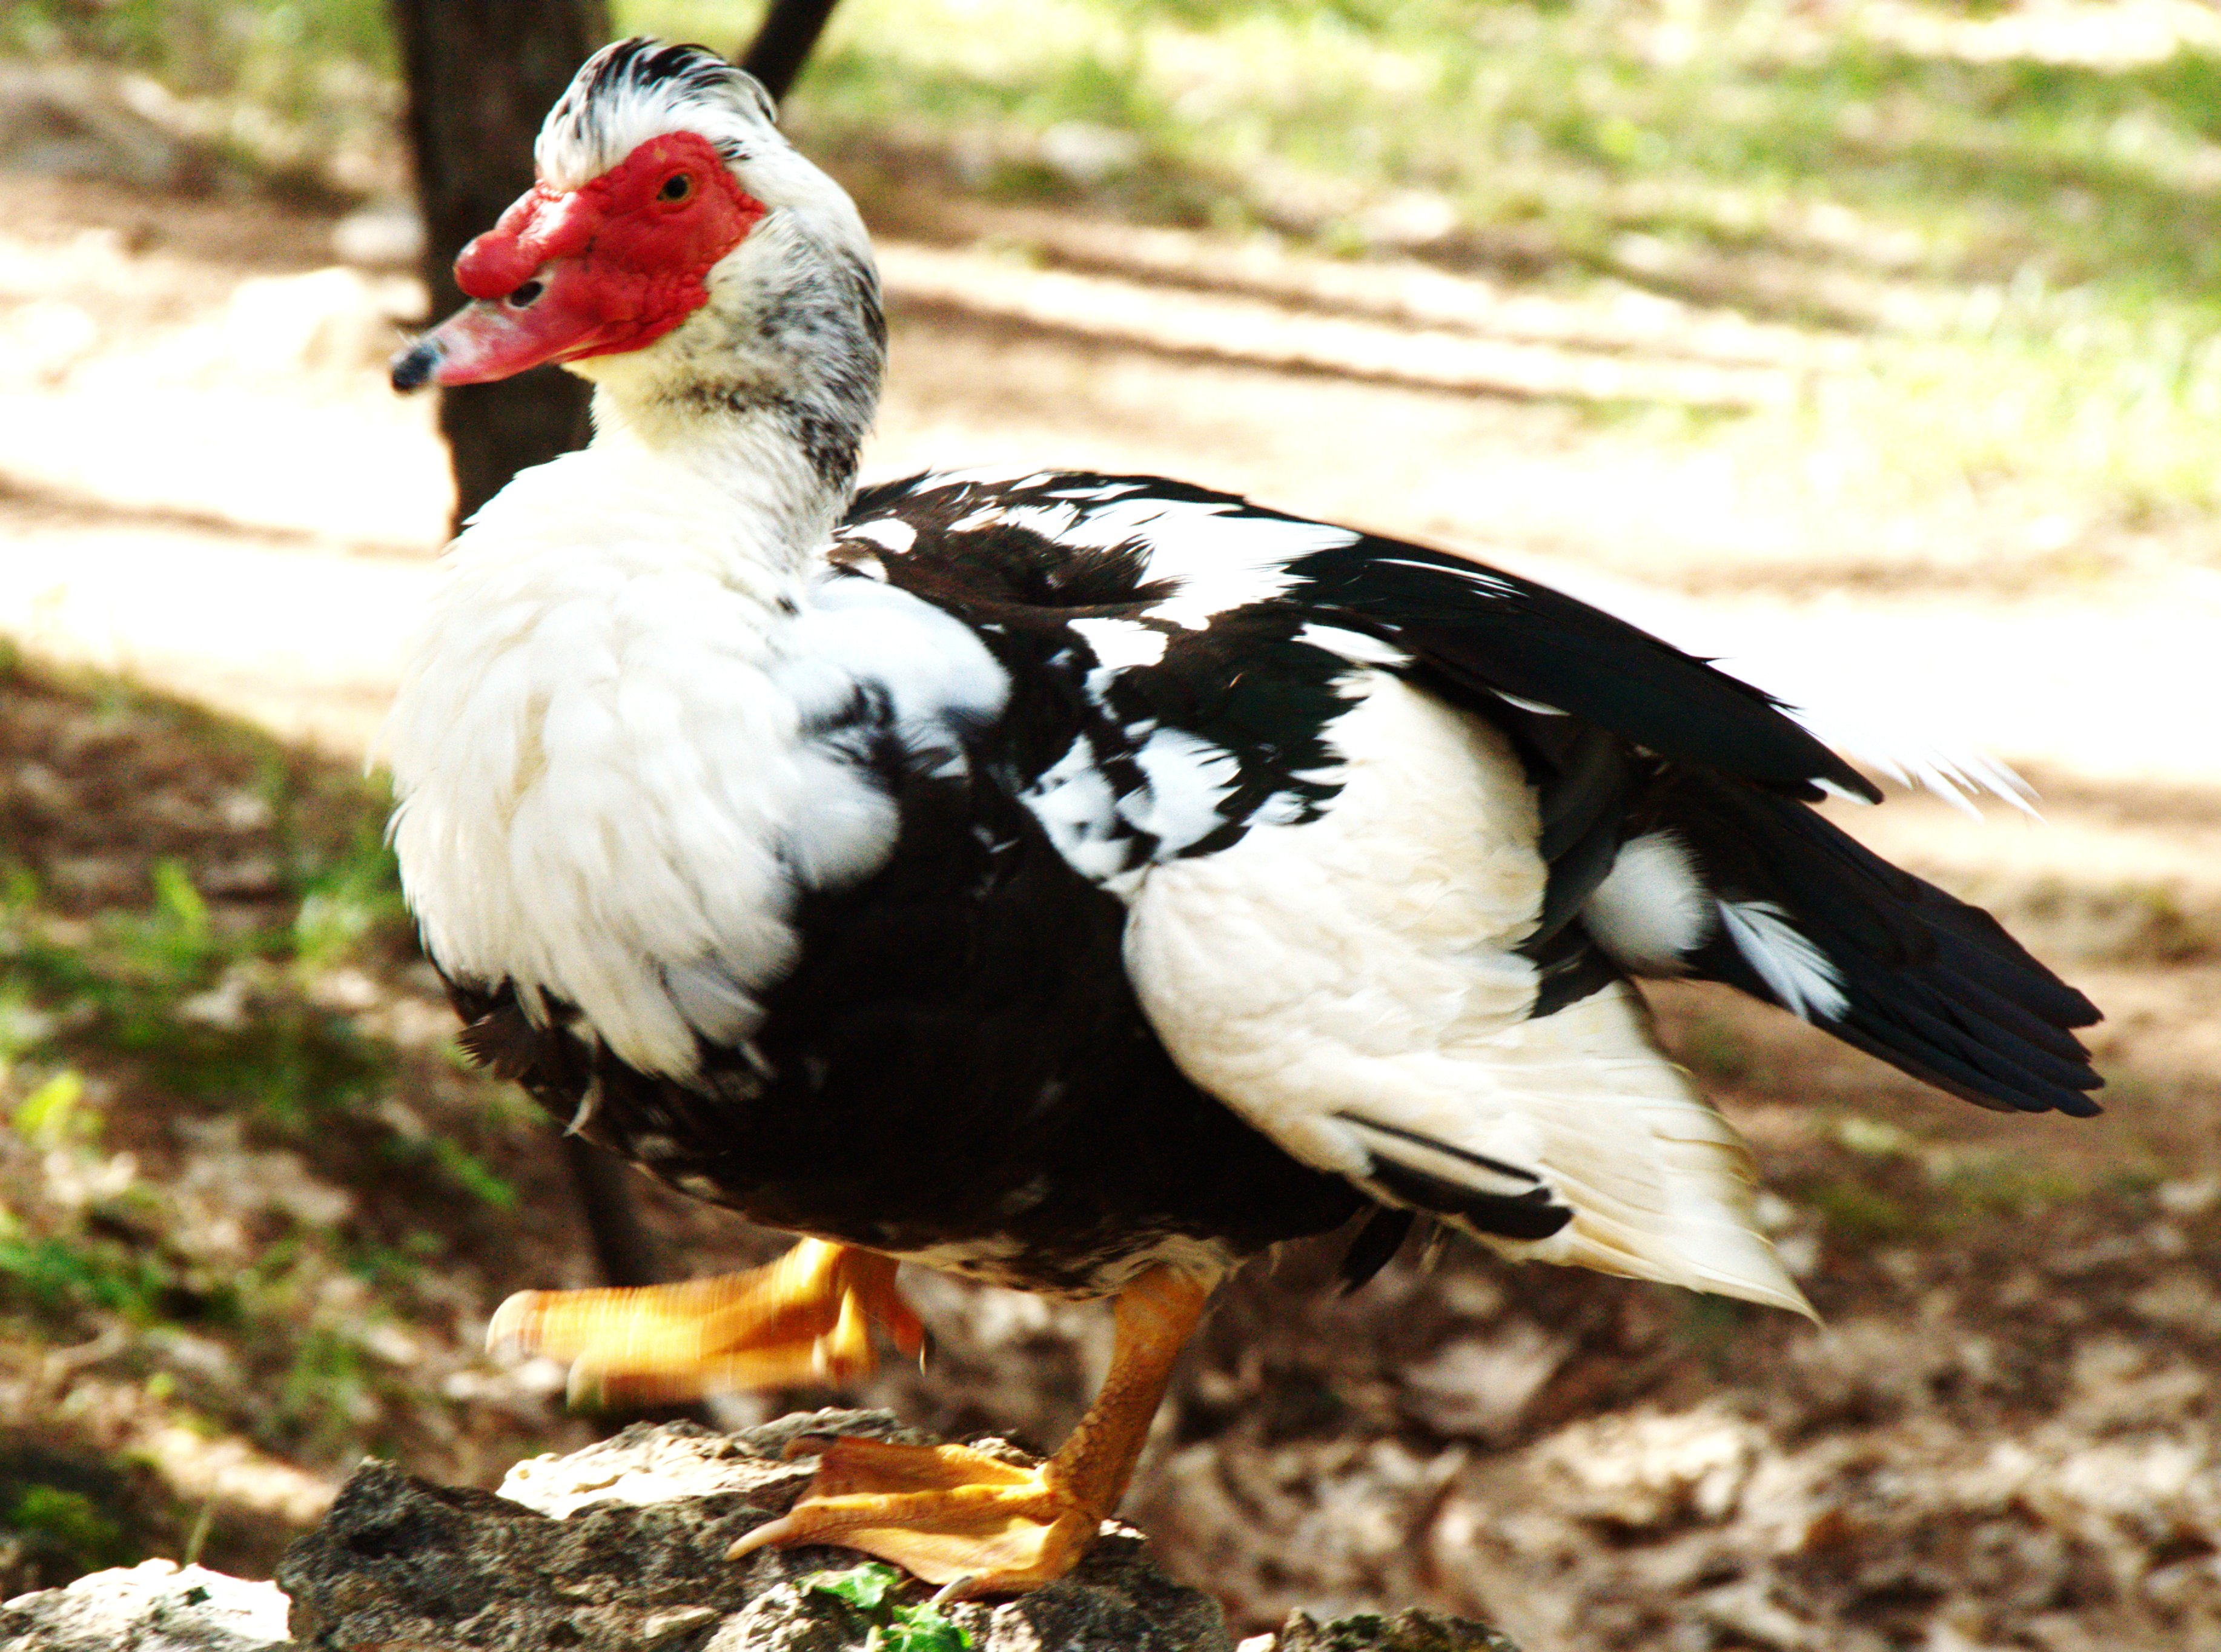 A_Muscovy_Duck_-_Creative_Commons_by_gnuckx_(4693286493).jpg